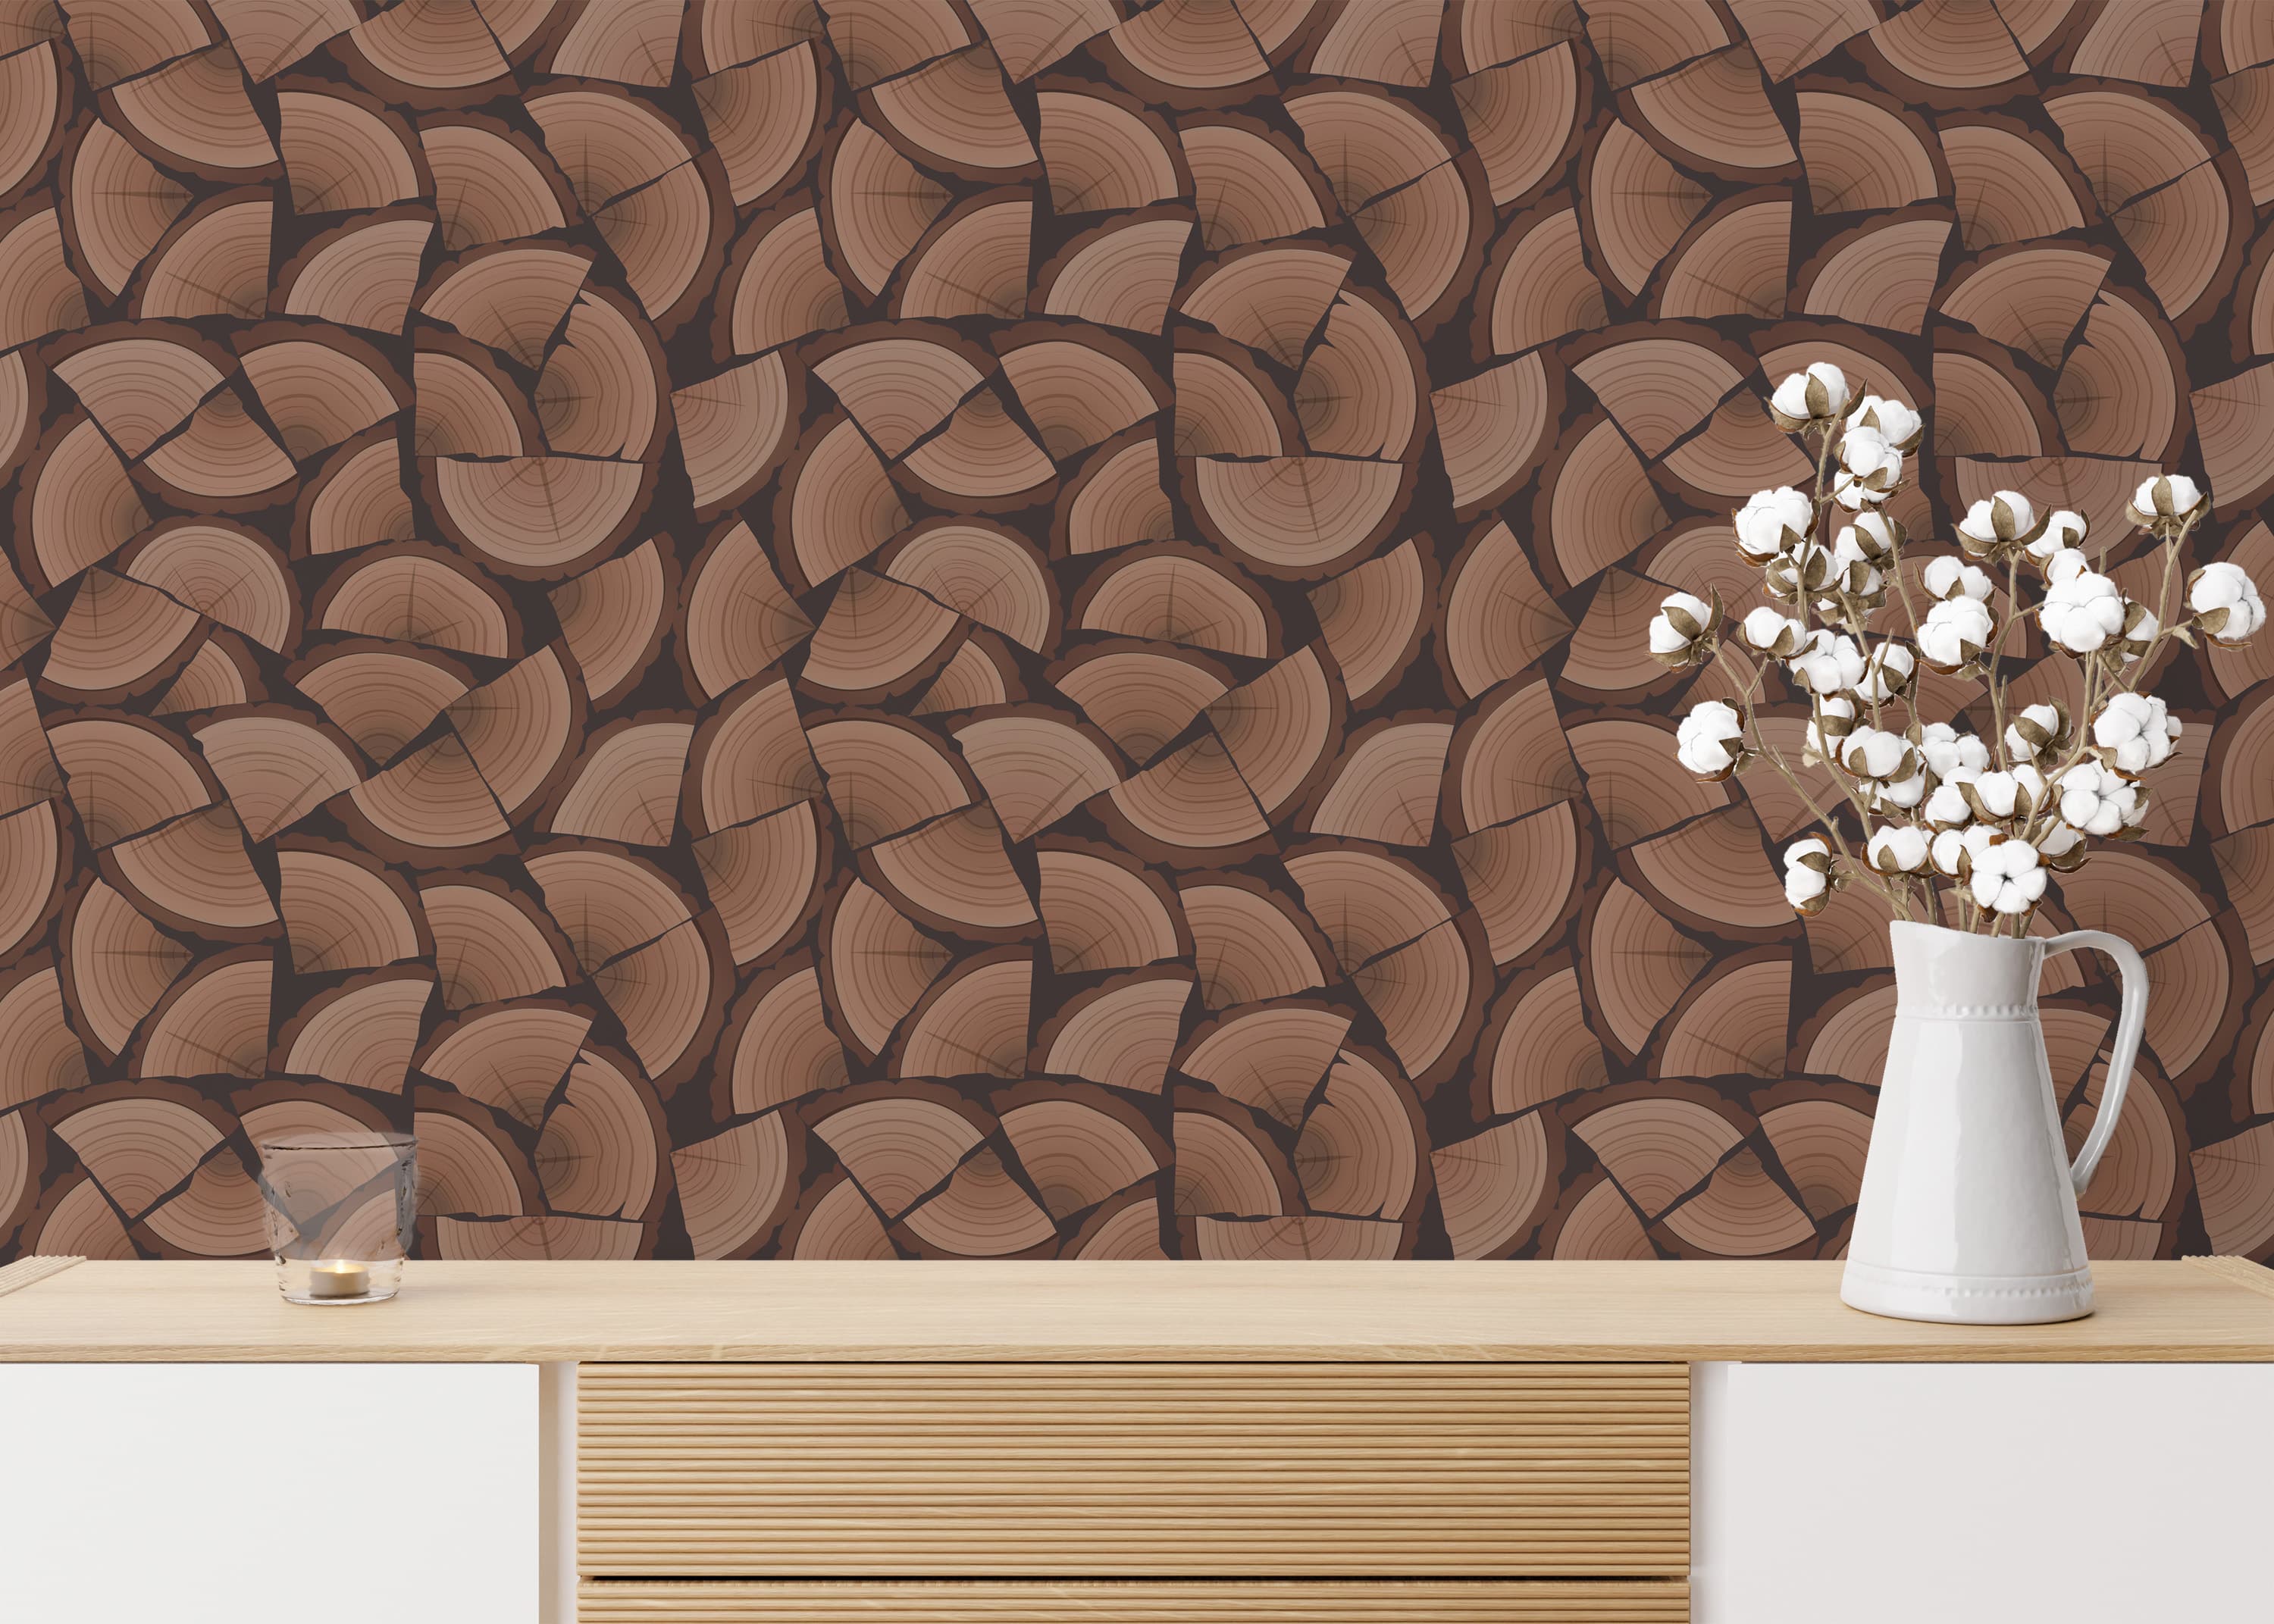 Modern wood wallpaper - Peel and Stick or Traditional